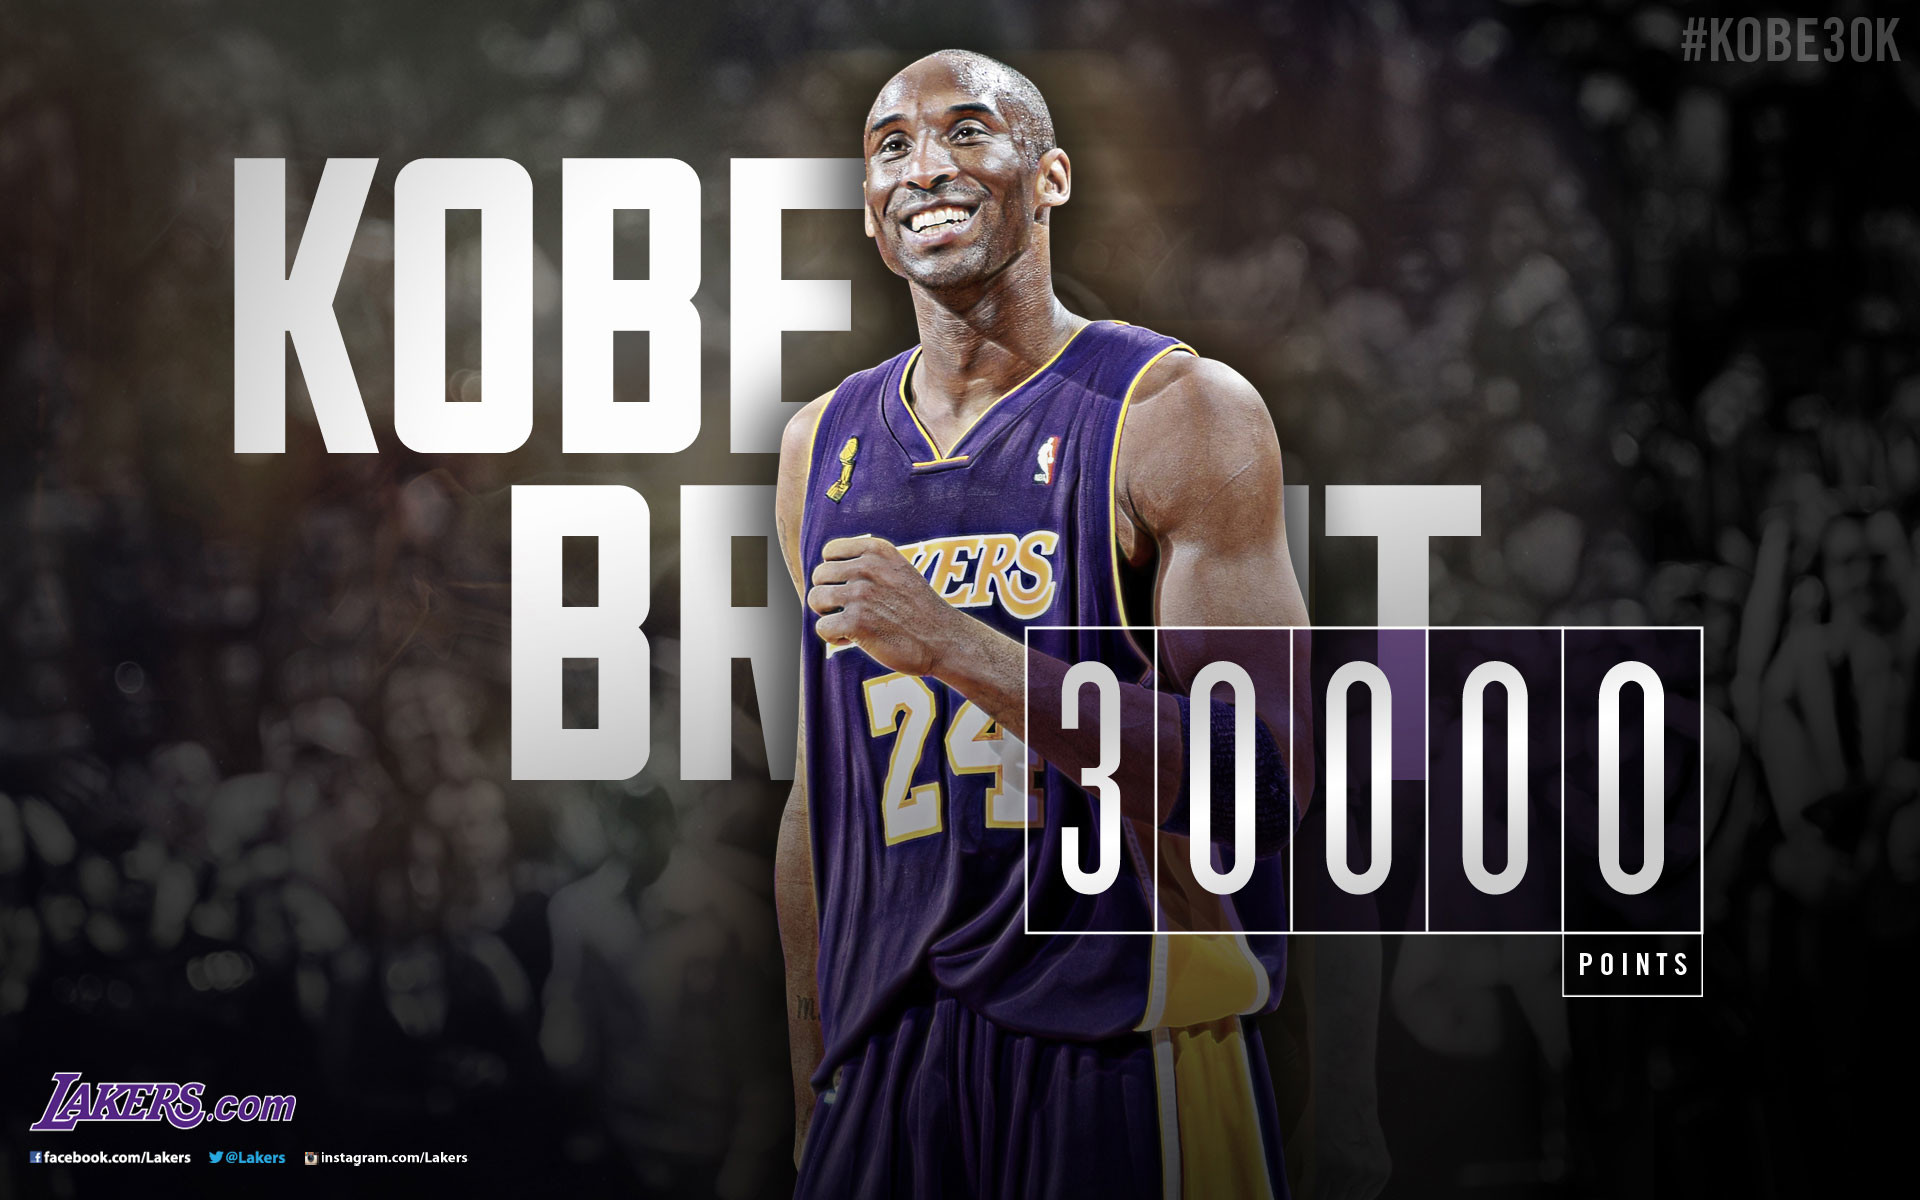 NBA Picture Kobe Bryant, the Youngest Player to Score 30,000 Points